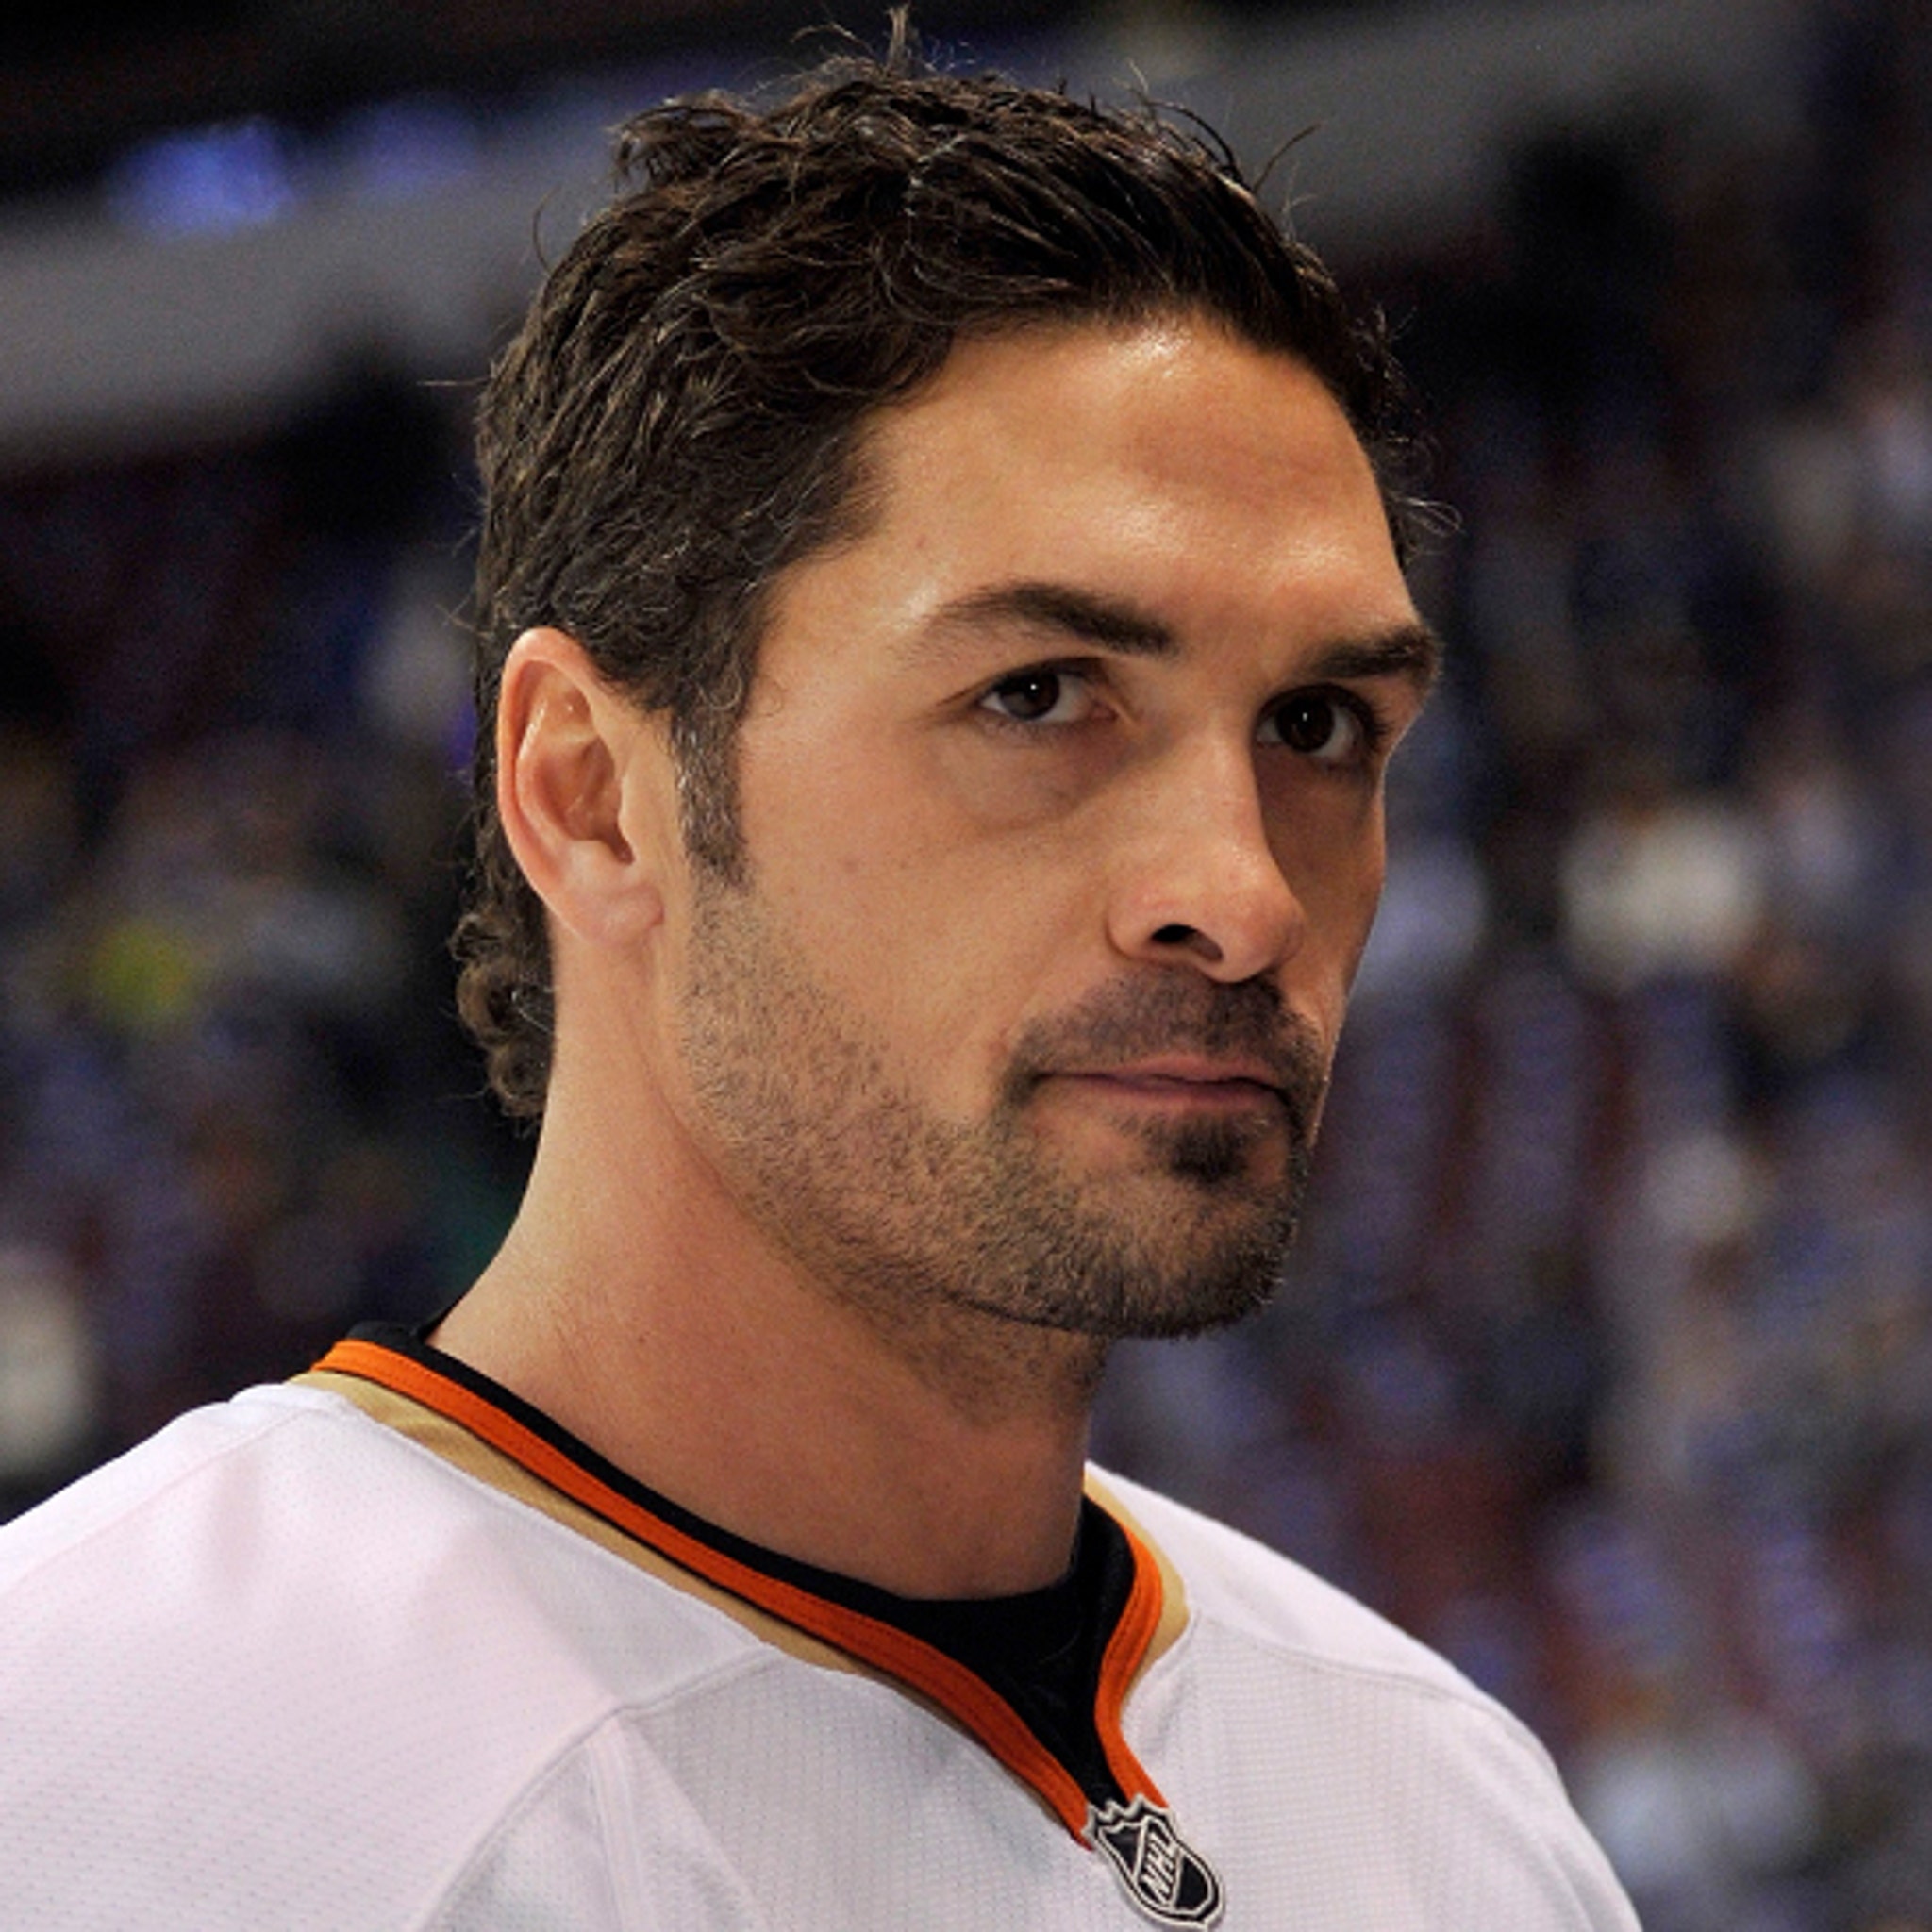 Former Oiler Sheldon Souray Takes Scathing Shot at His Old Team